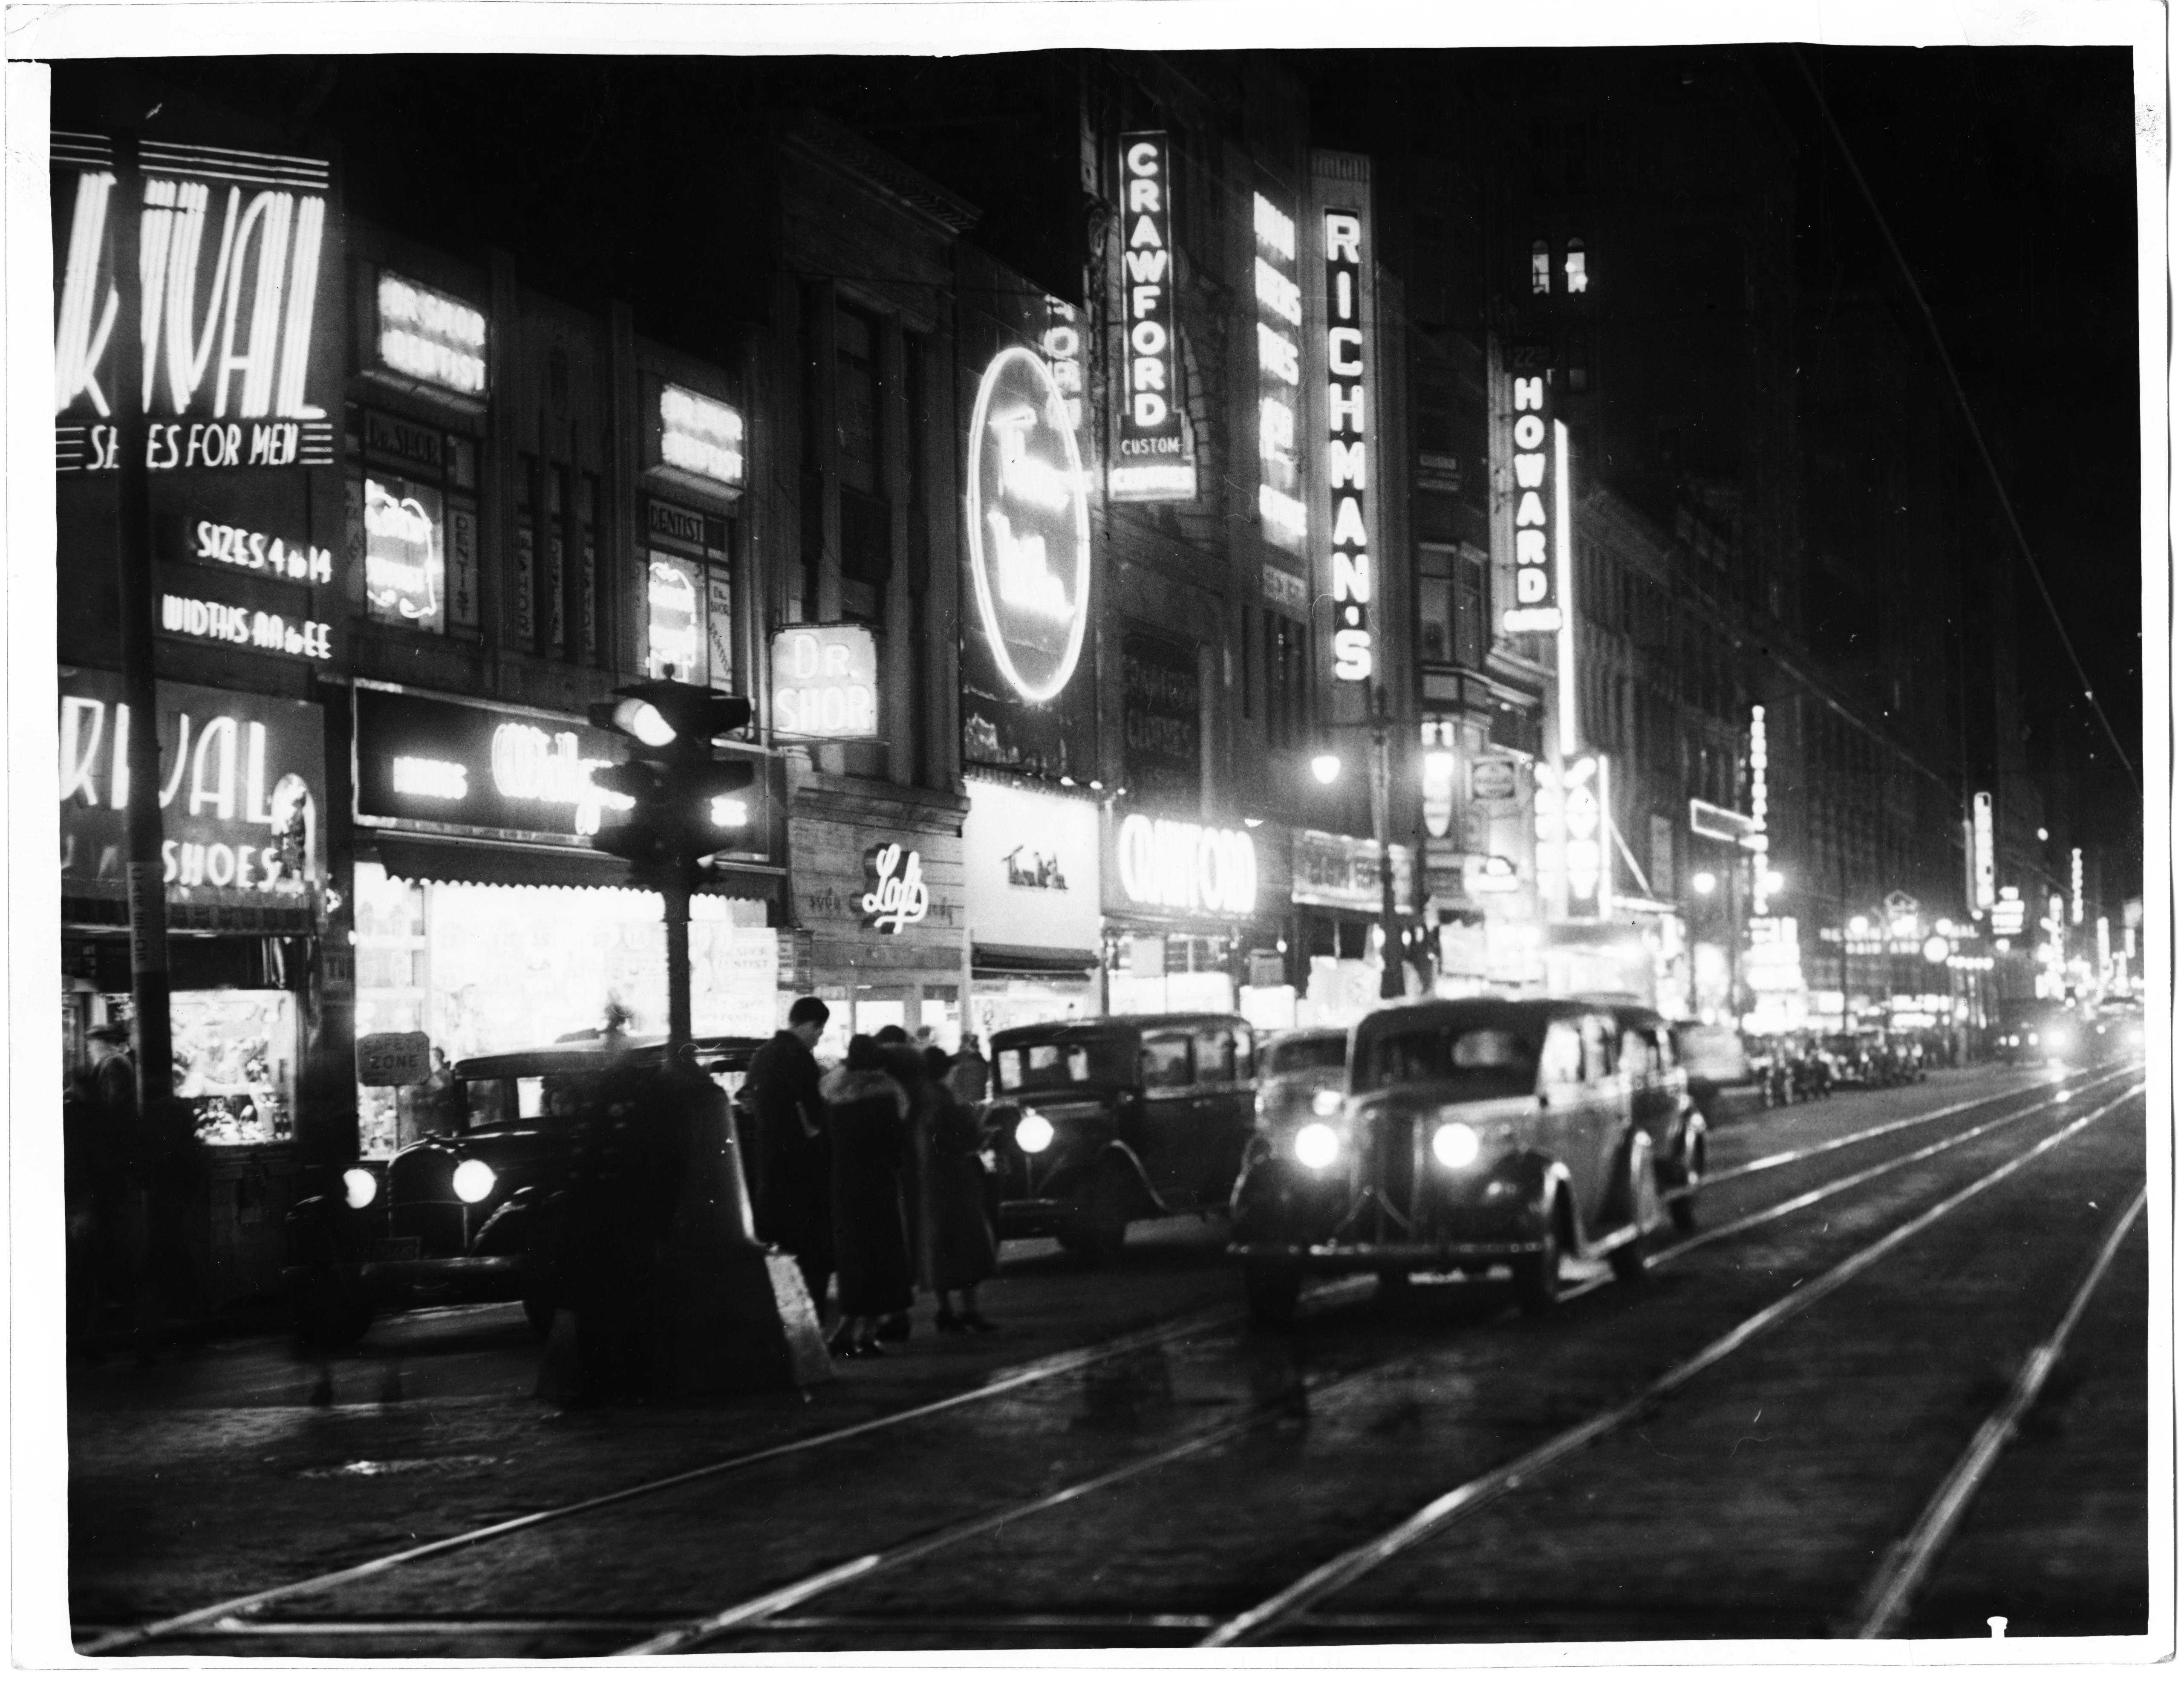 Record Number: 744Collection: Philadelphia Record Photograph Morgue[V07]Folder Number: FF 3011Reproduction restrictions: UnknownAddress: 1239 Market StreetPhiladelphia, PA 19107, USADate of Original: February 3 1938Image description: Photograph depicts Market Street at night looking east from 13th Street, showing N. side of street.